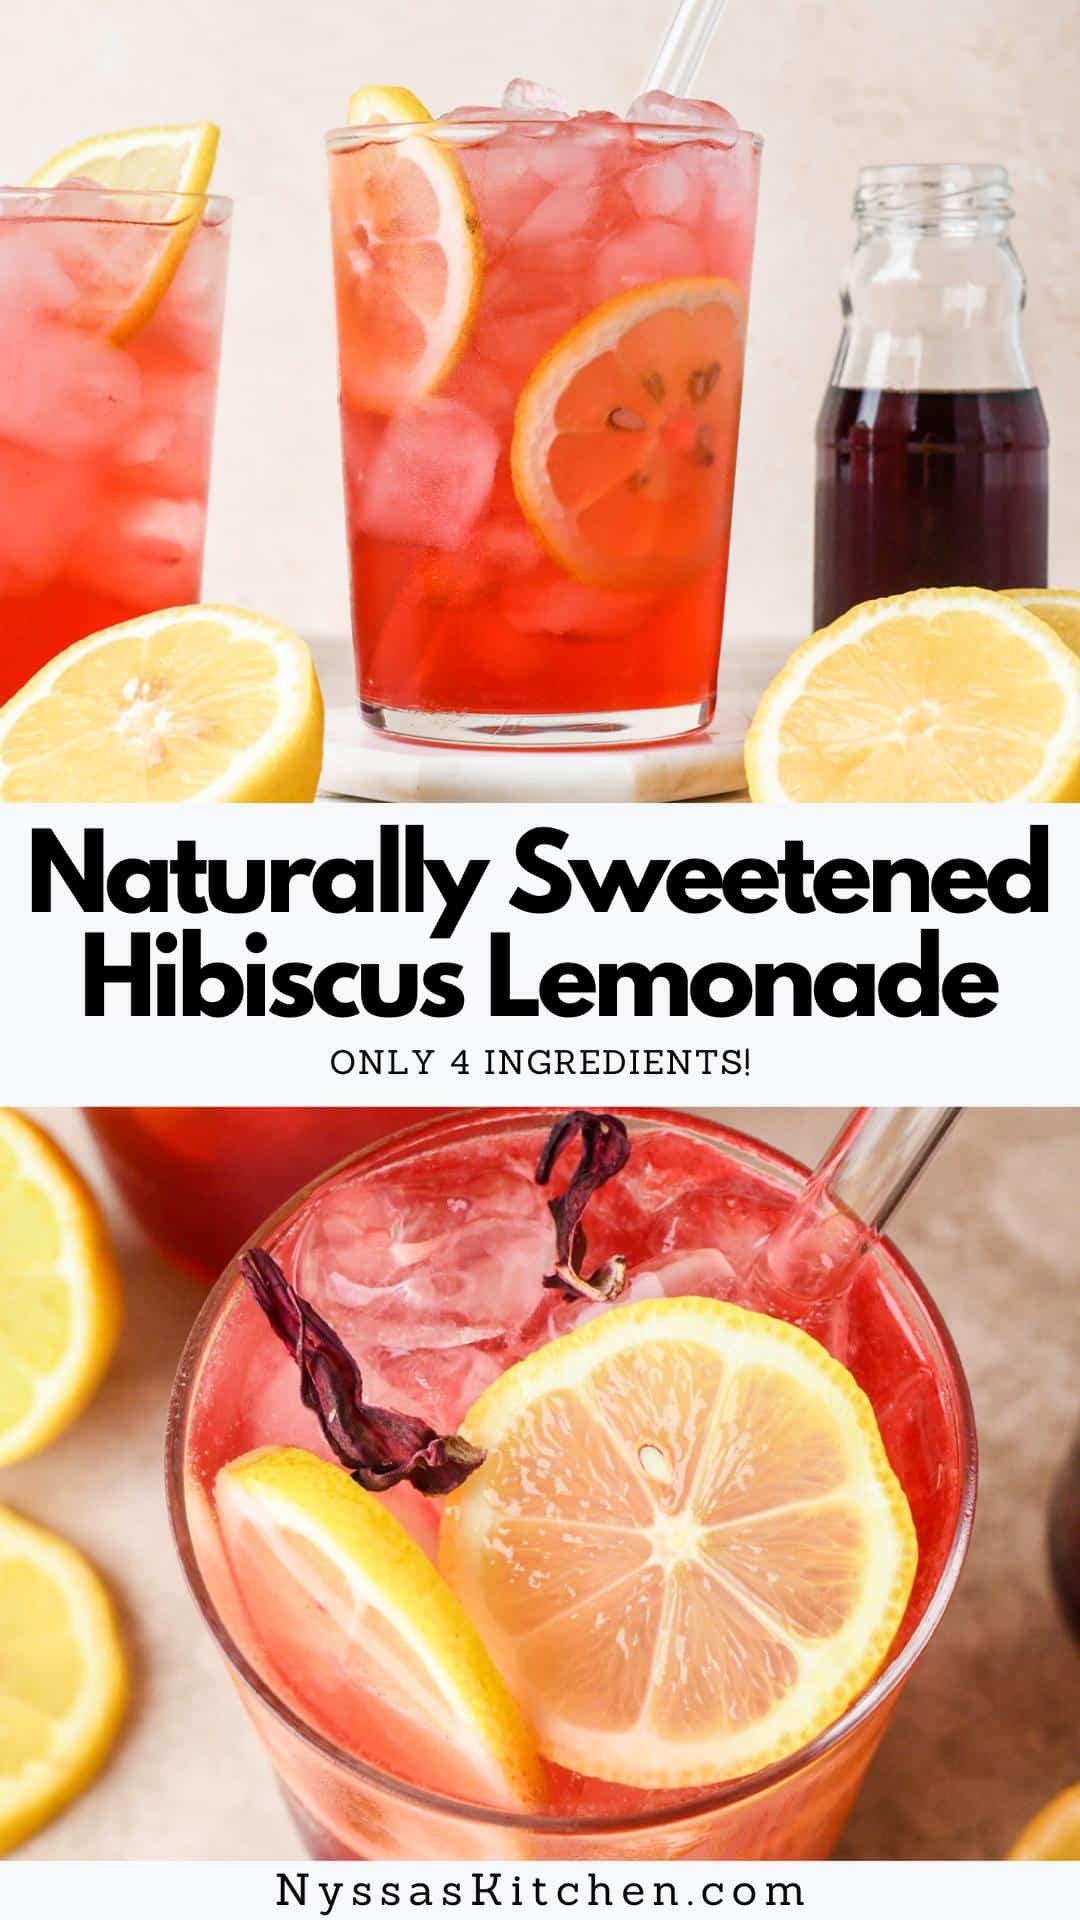 This juicy and refreshing 4-ingredient hibiscus lemonade is made with an irresistible blend of naturally sweetened homemade hibiscus syrup and fresh lemon juice. Ready in less than 30 minutes and easy to make ahead for a family get together, summer BBQ, or weekend party! The perfect non-alcoholic drink to enjoy throughout the warmer months of the year.